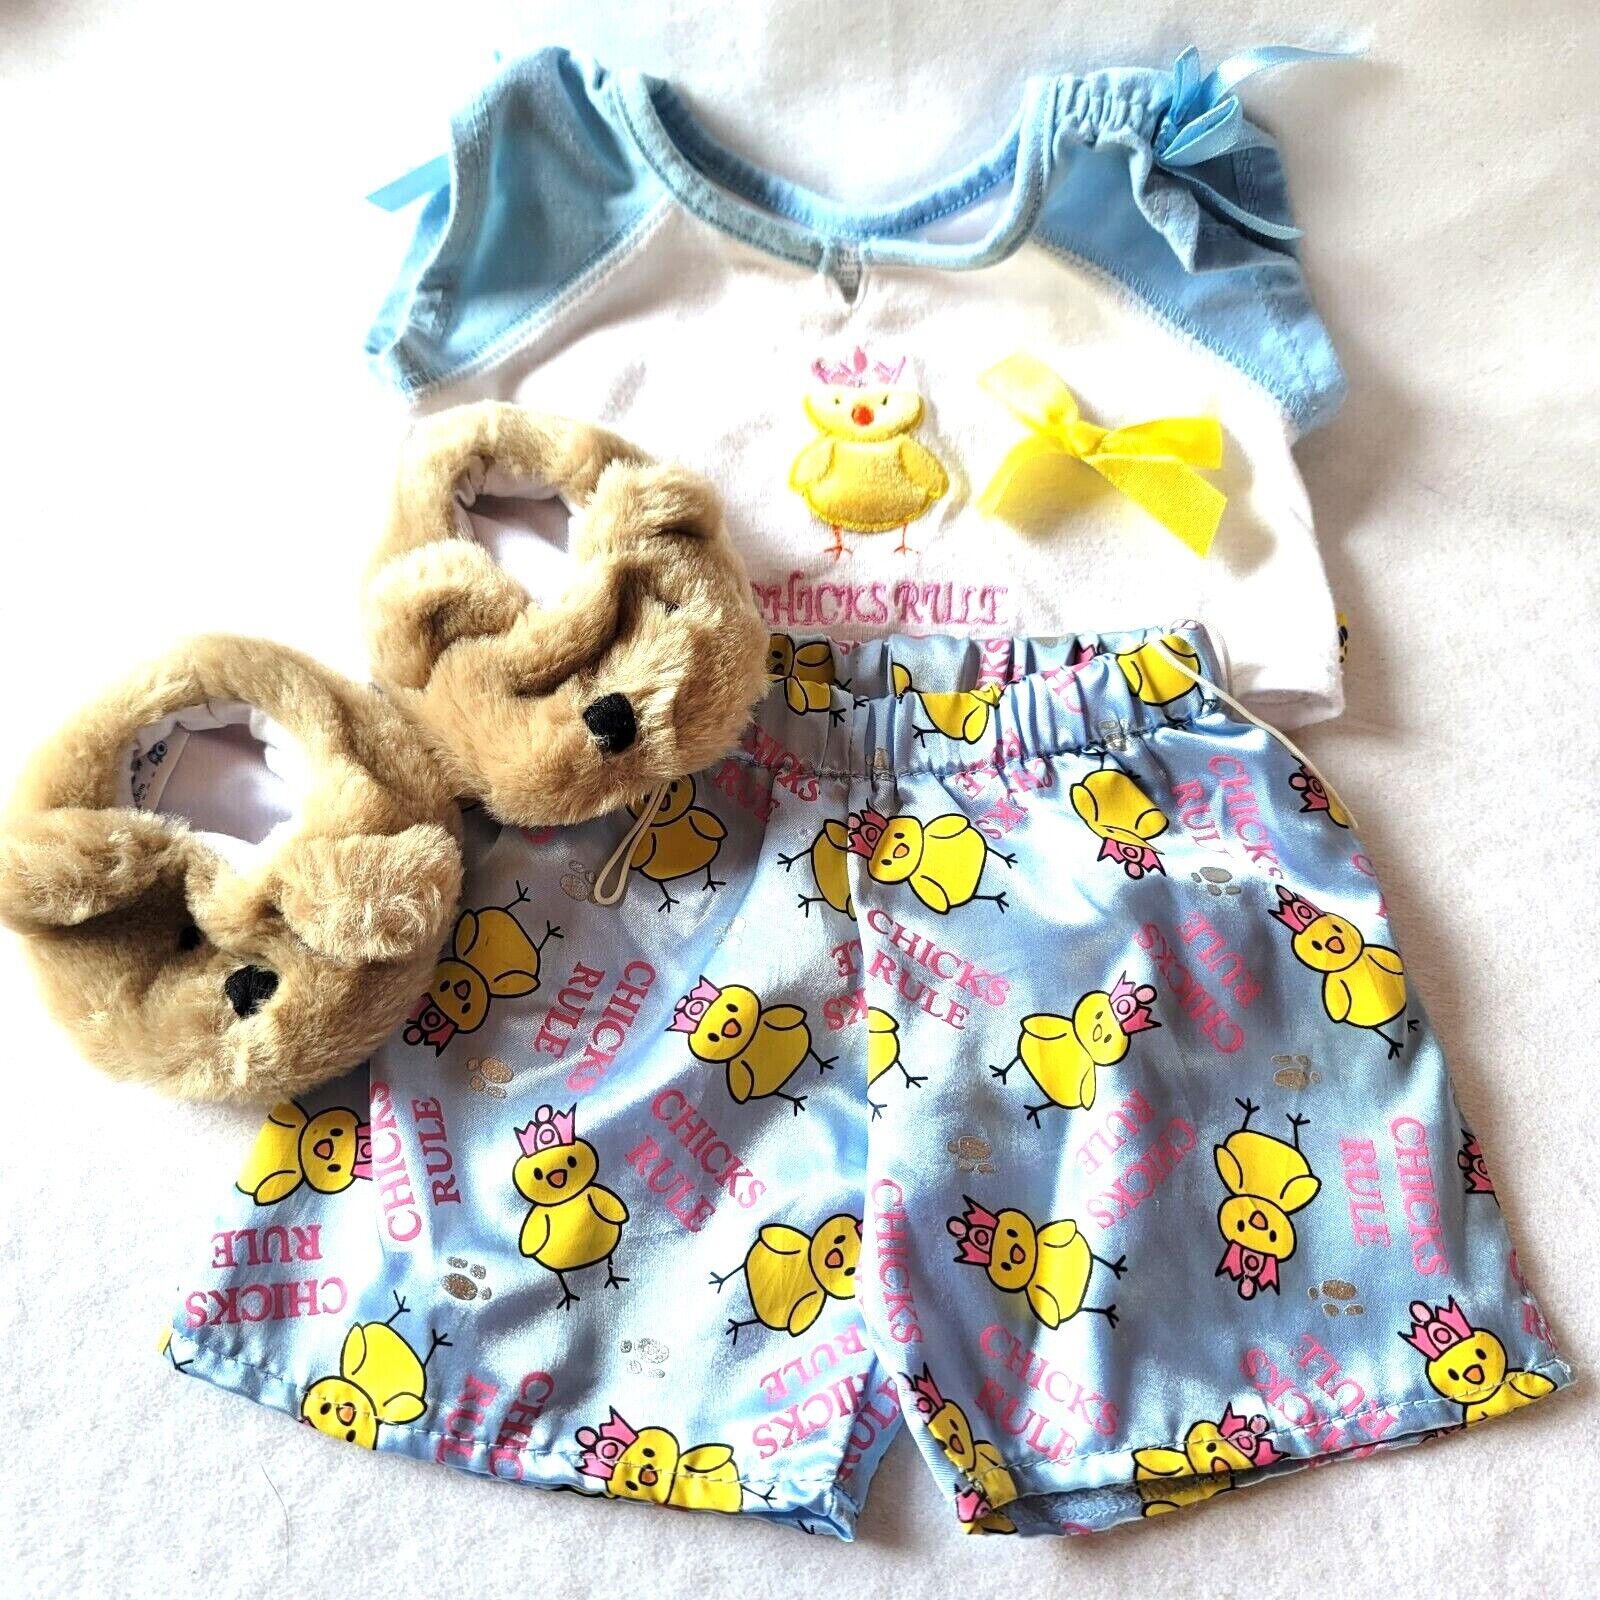 BAB Chicks Rule Pajama Set Shorts, Top, Slippers Build A Bear Clothing Lot 5 Pc Build-A-Bear Workshop N/A